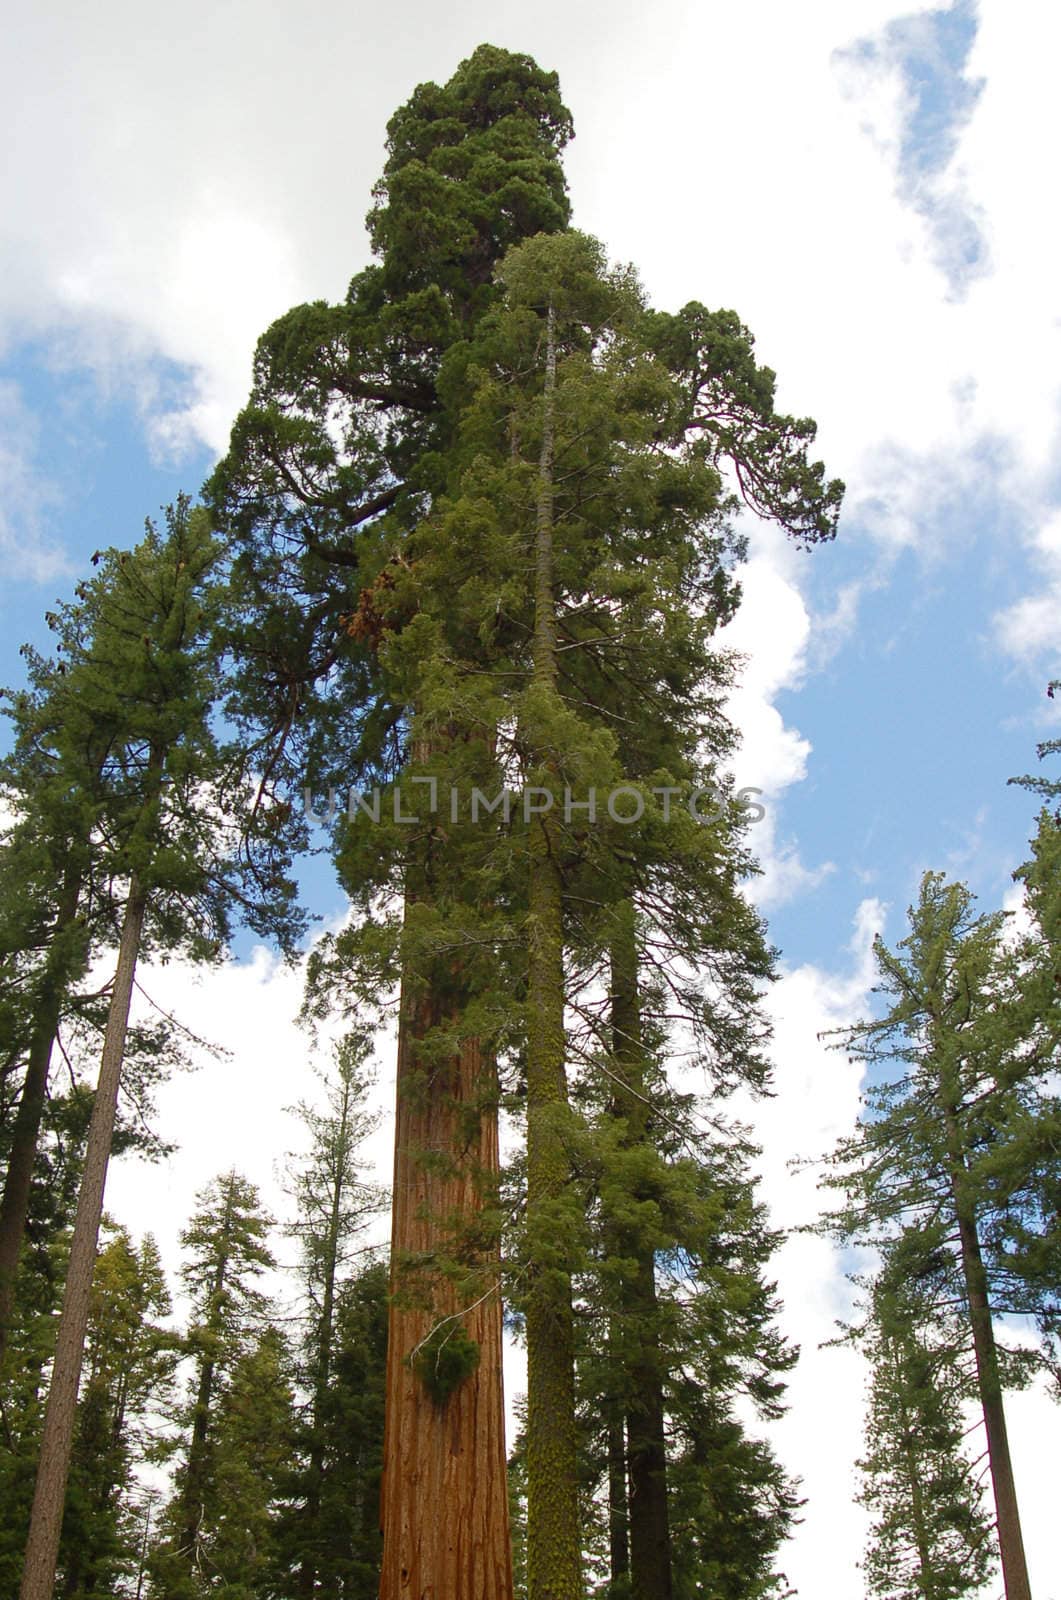 tall green sequoia trees in kings canyon national park california